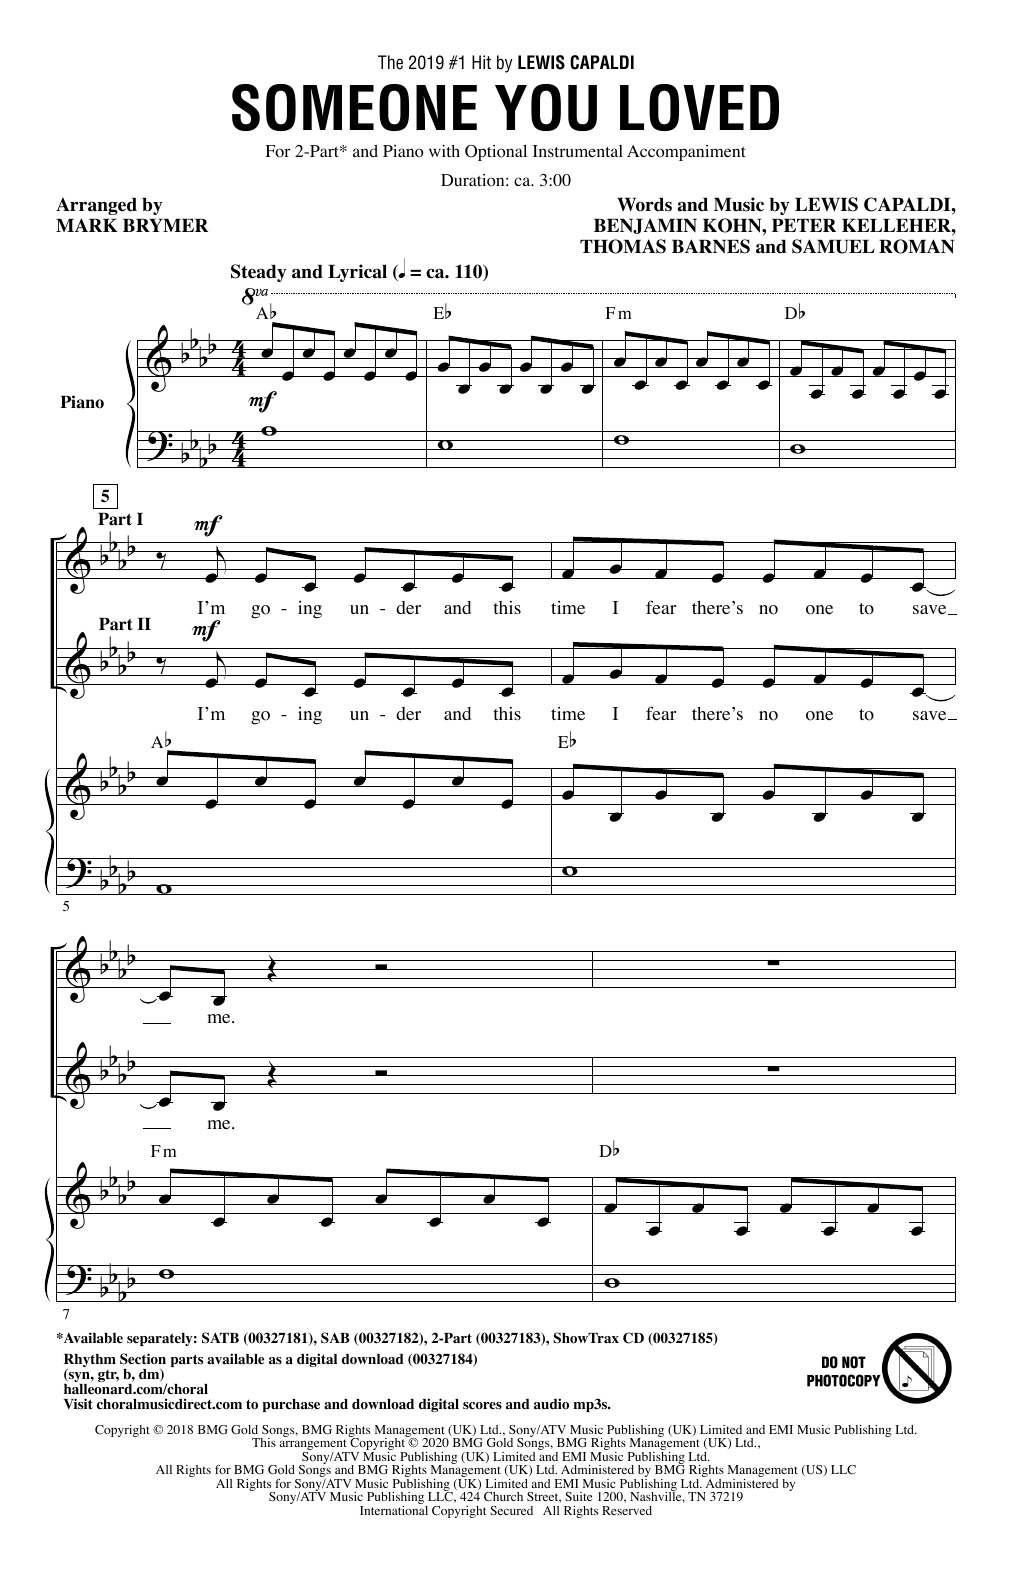 Download Lewis Capaldi Someone You Loved (arr. Mark Brymer) Sheet Music